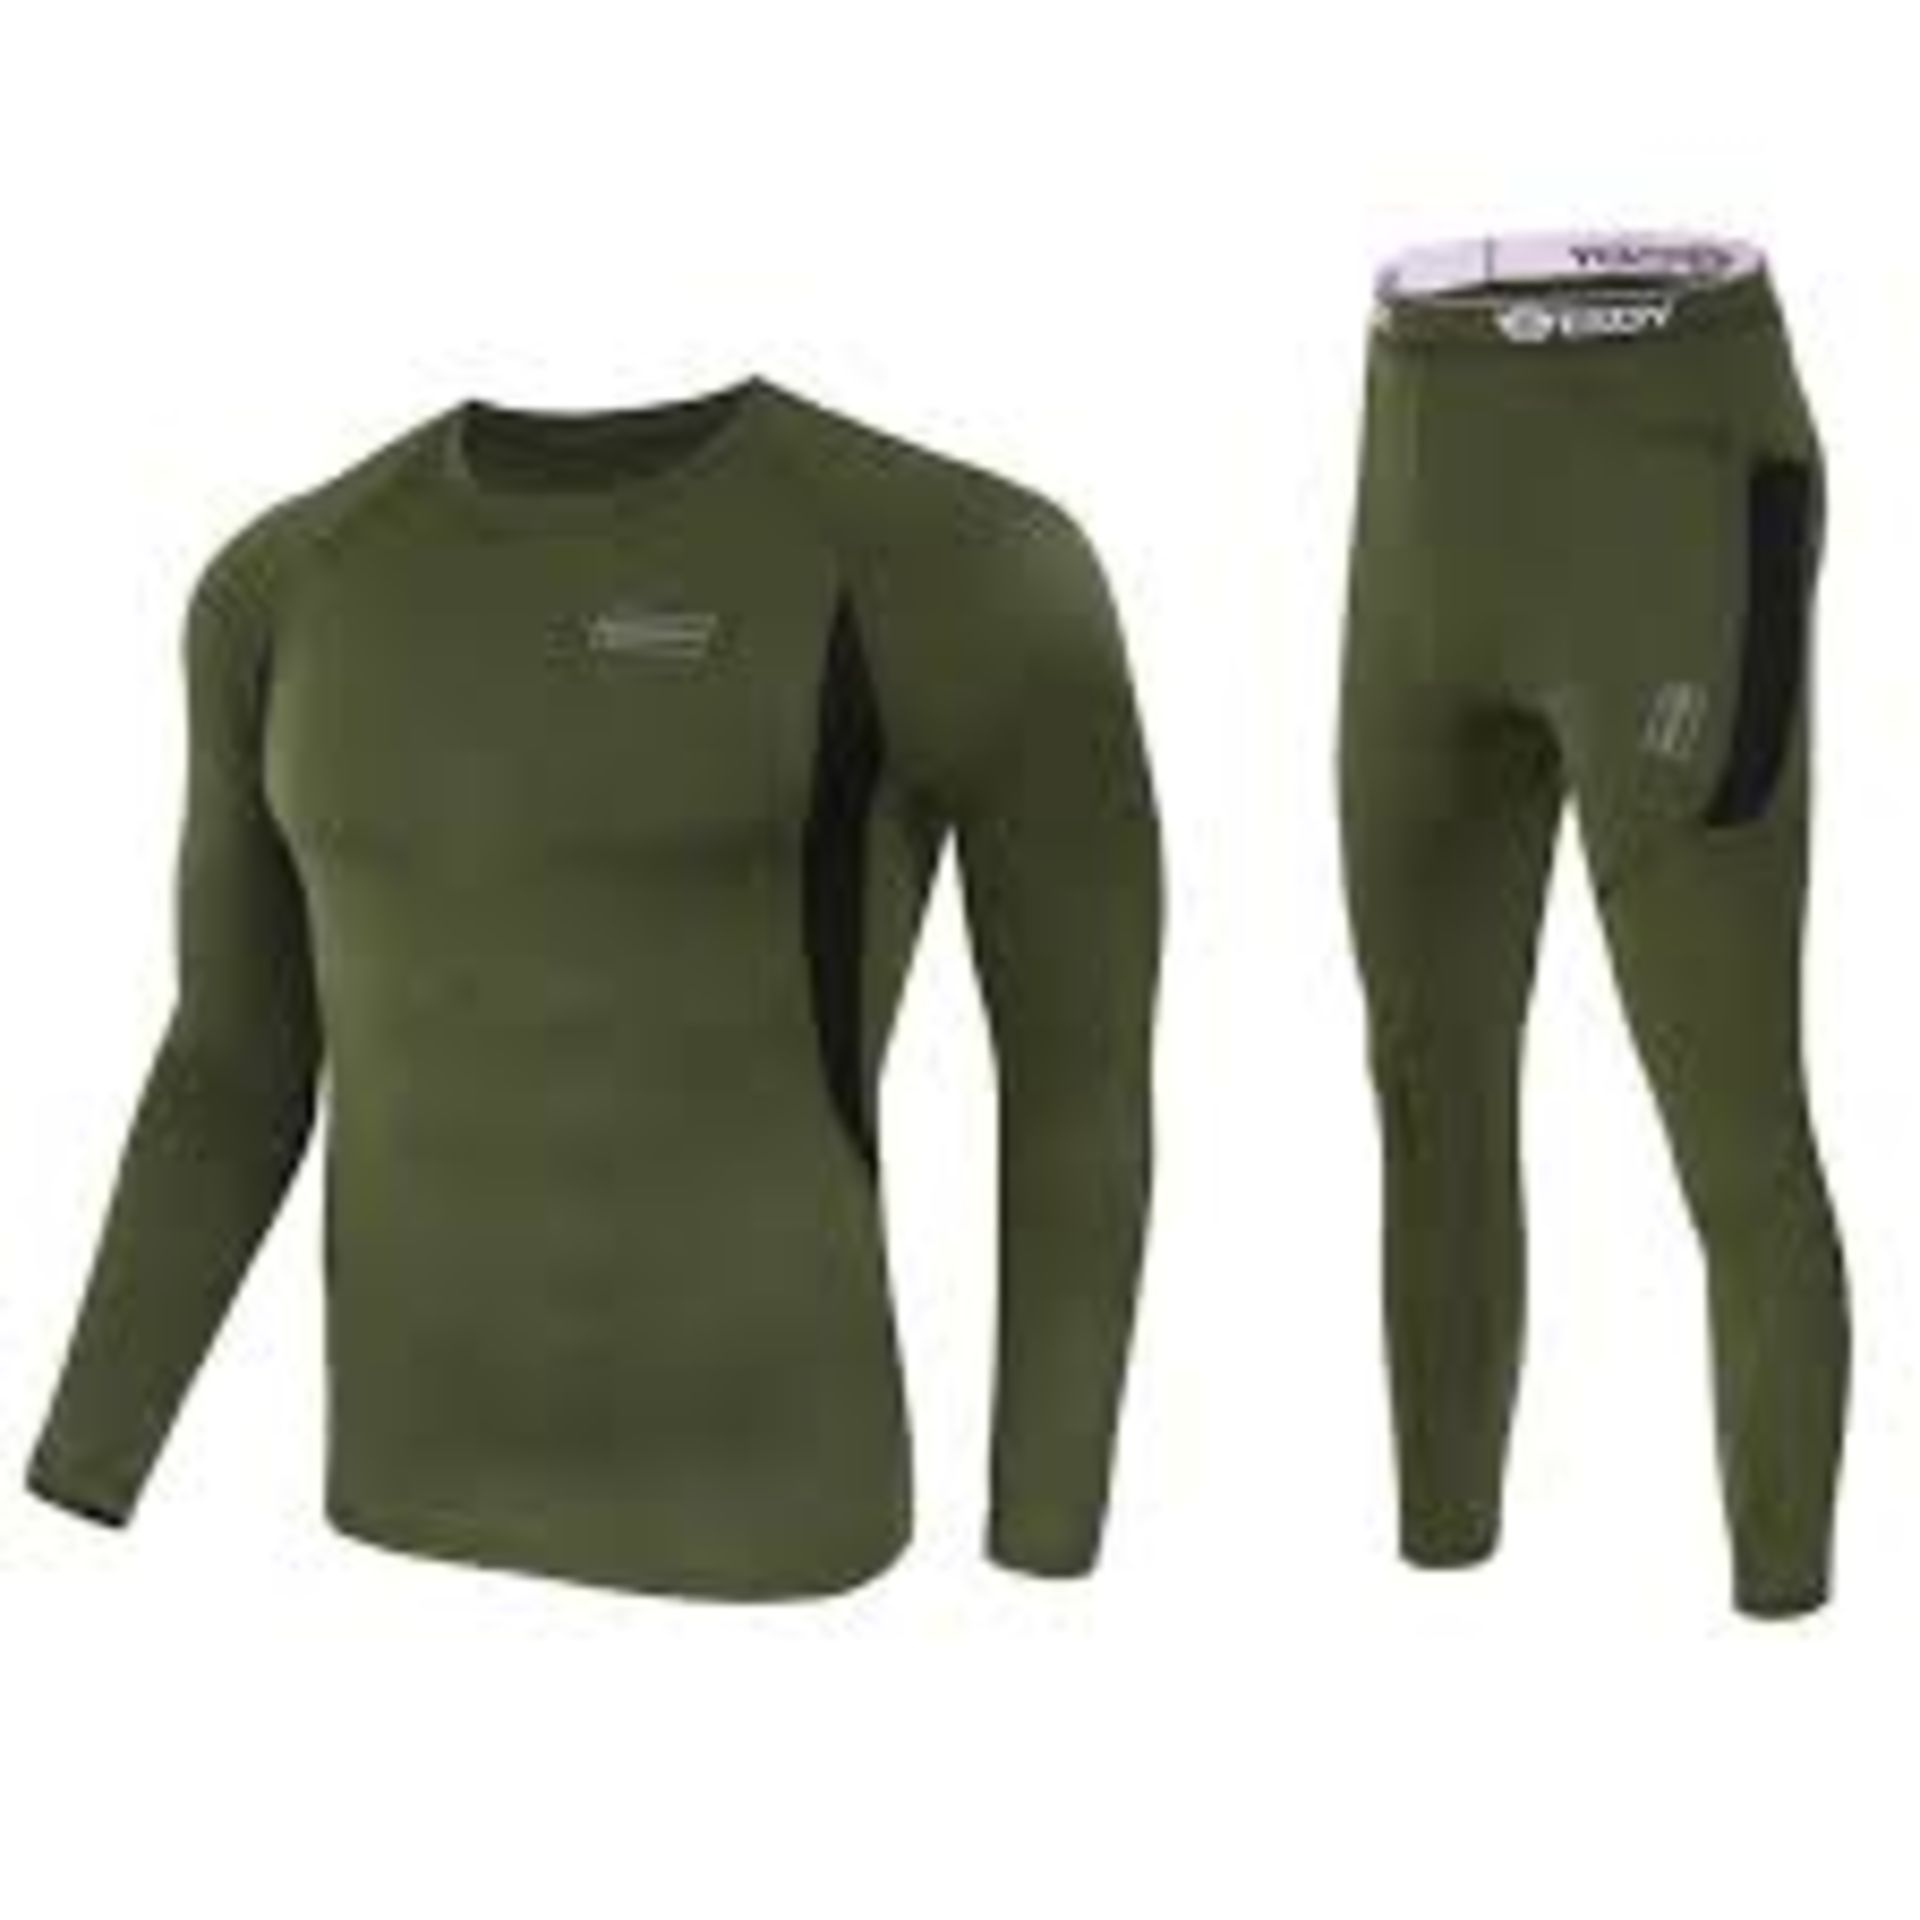 Brand New ESDY Khaki Green Gents Thermal Under Garments in Assorted Sizes